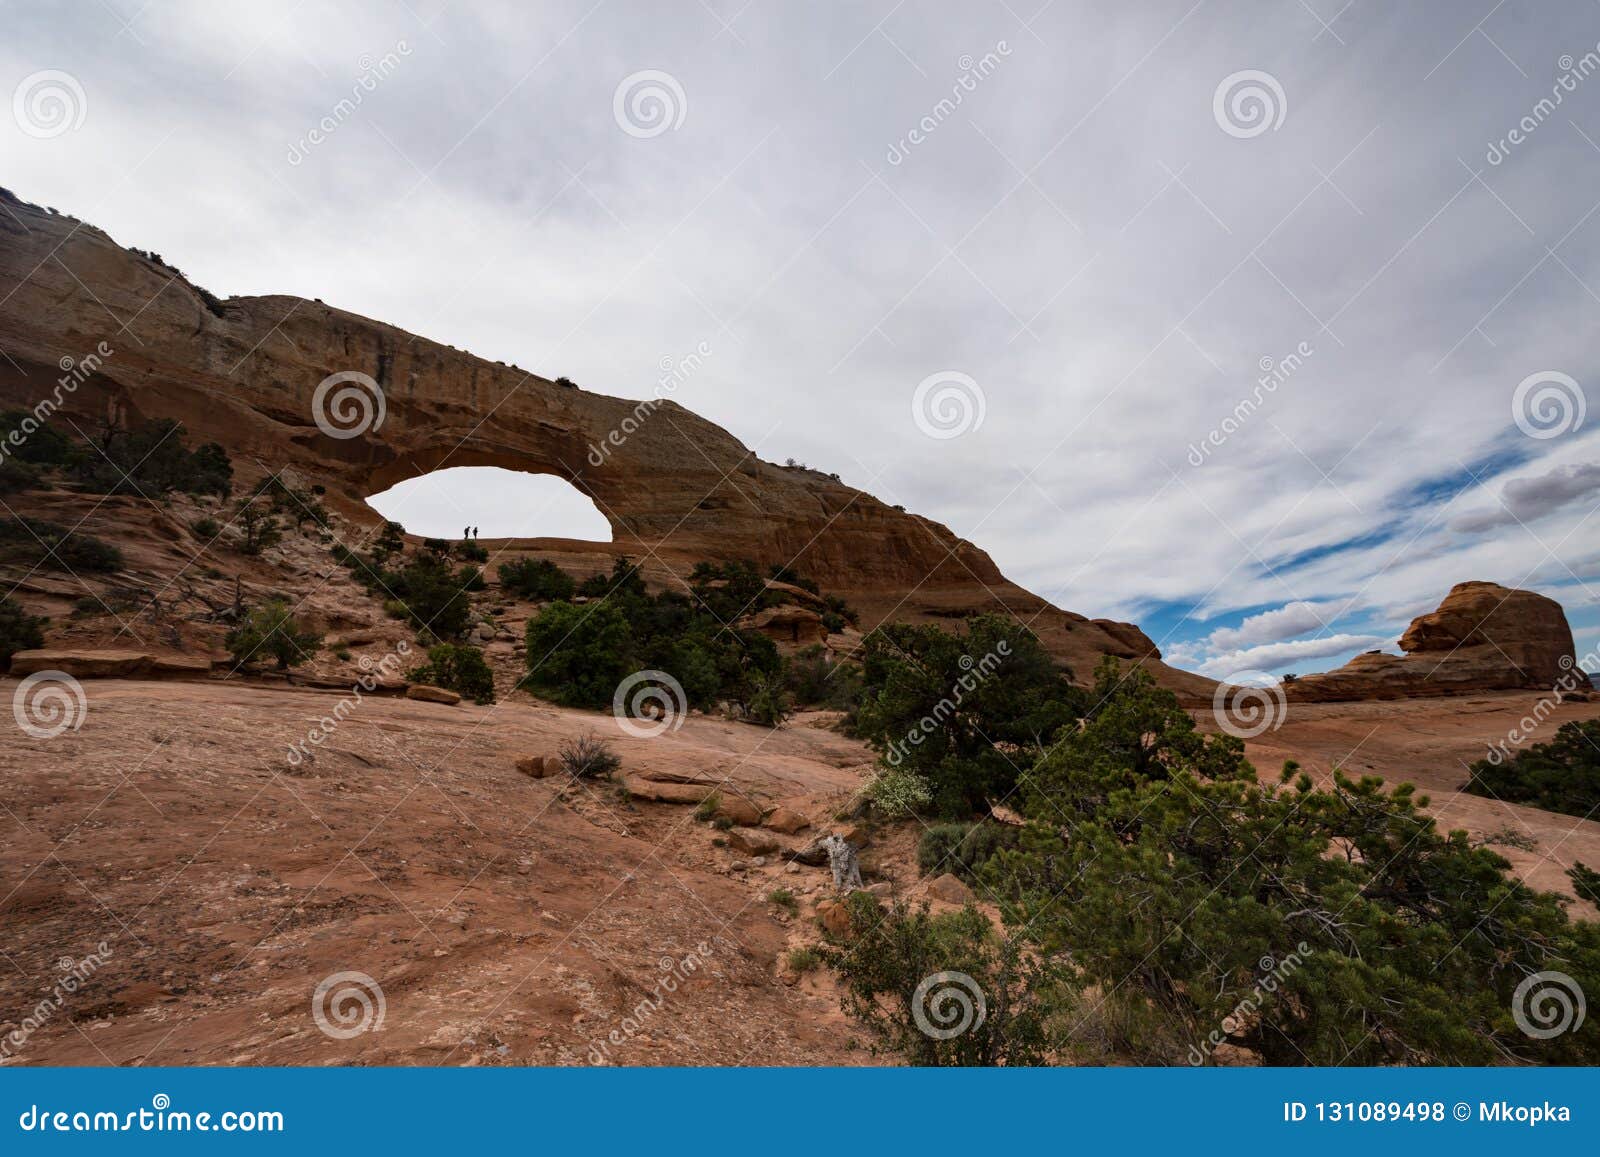 wilson arch, located in dry valley utah, is an entrada standstone formation